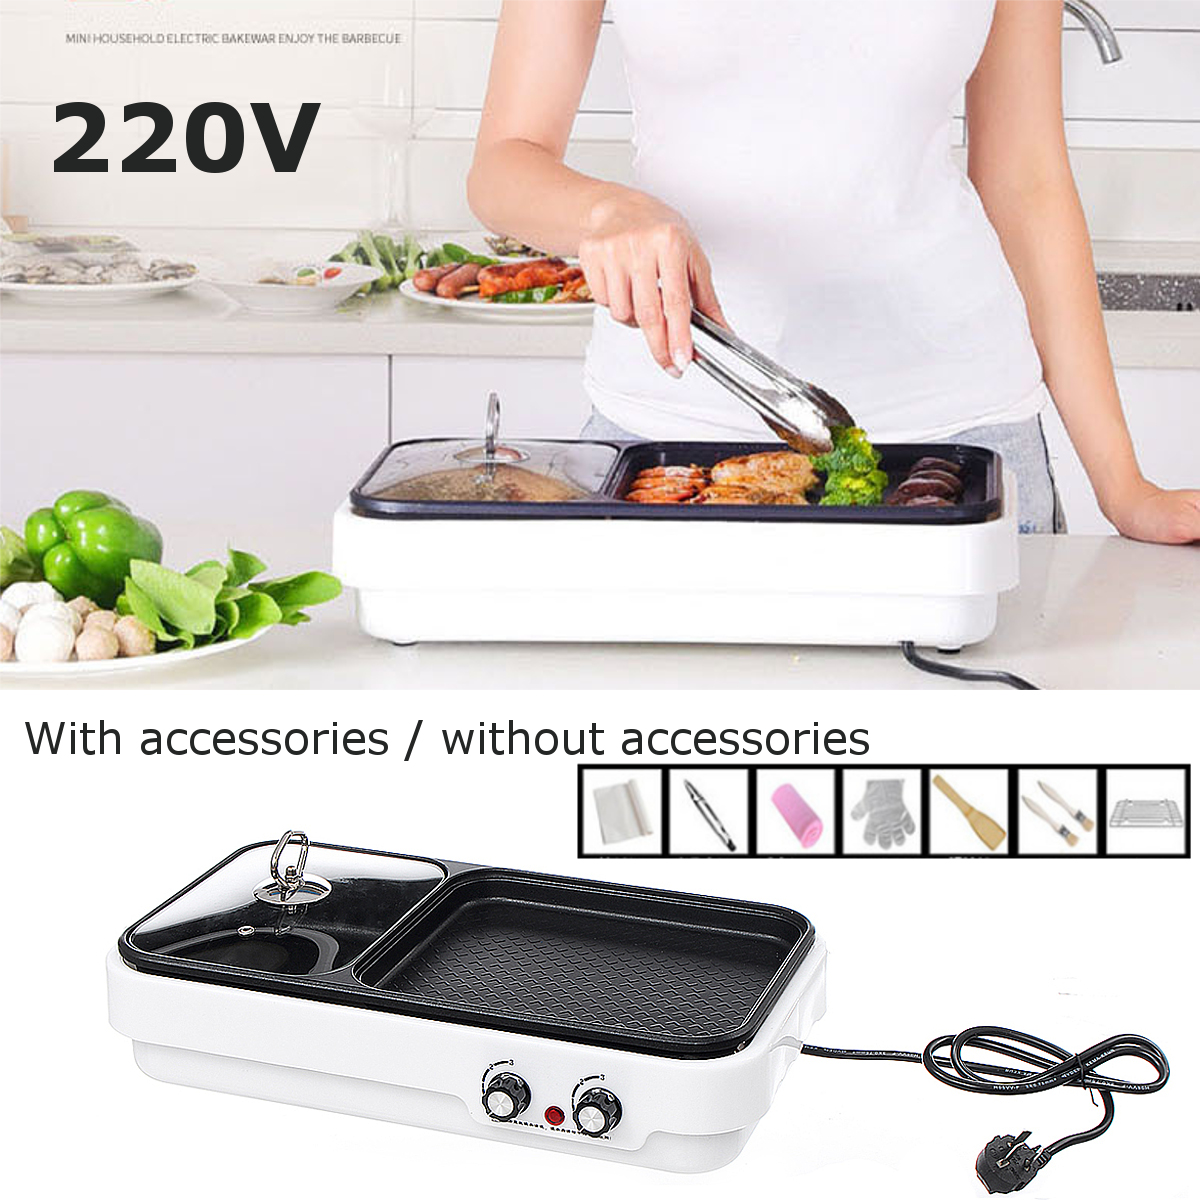 Electric Baking Pan Barbecue Hot Pot Non Stick BBQ Grill Oven Kitchen Cookware 14